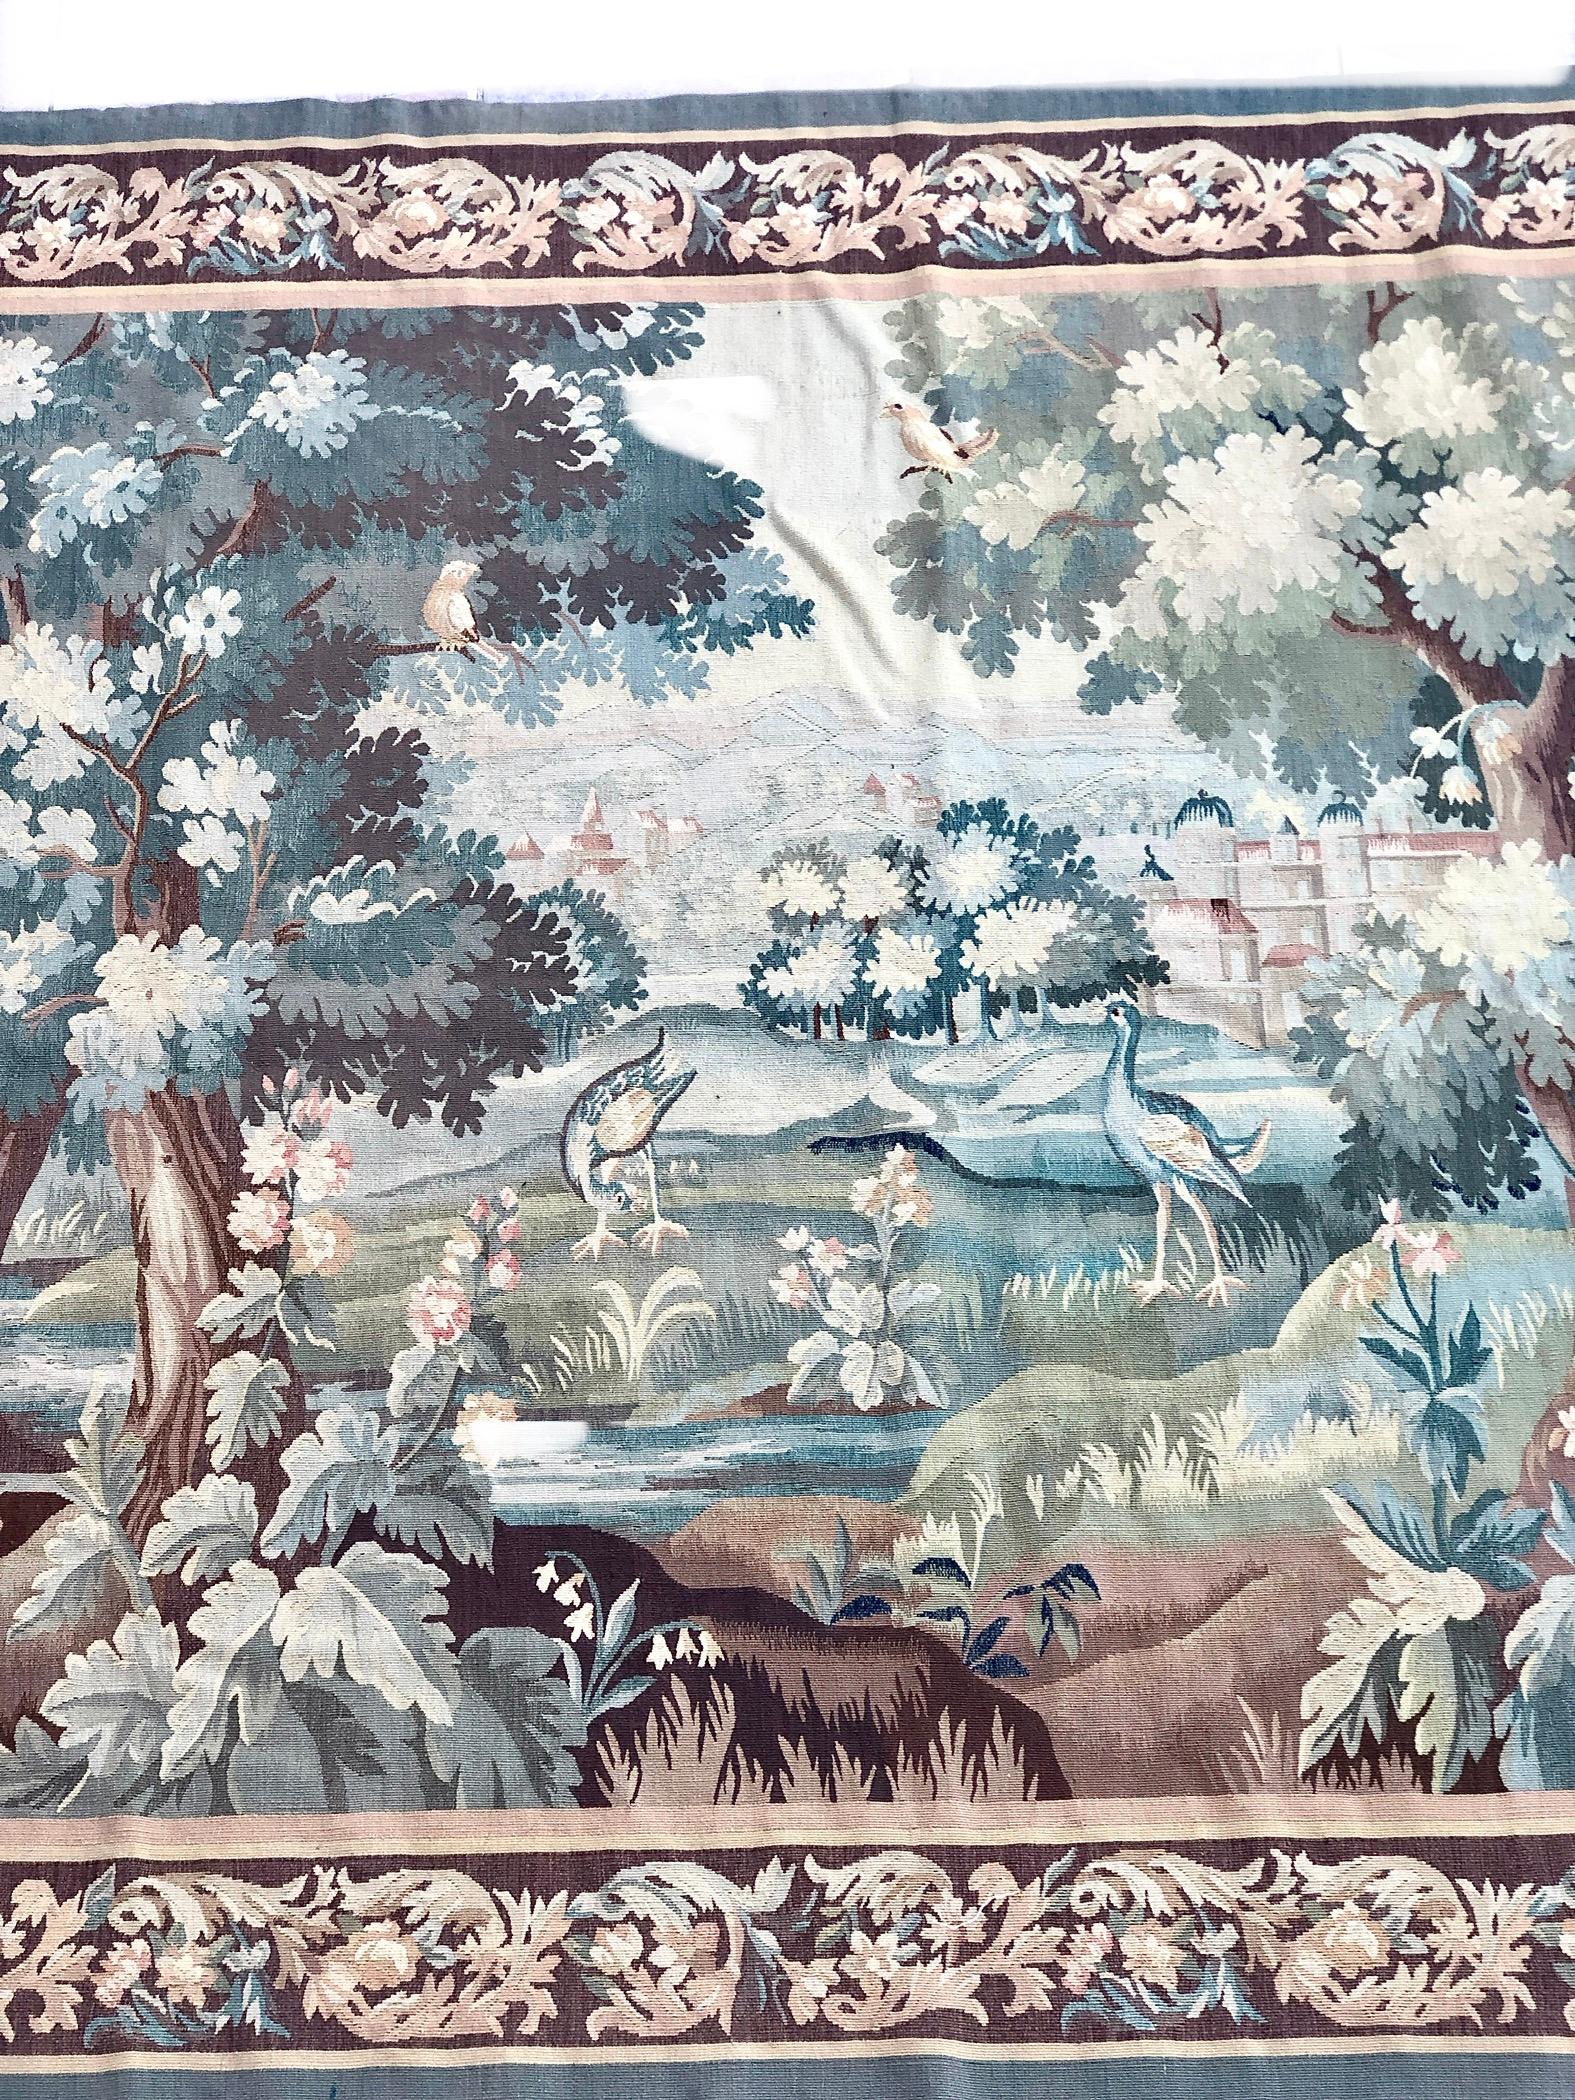 A particularly fine 19th century Aubusson Verdure tapestry, depicting a landscape scene of the French countryside, with a castle in the background, a village hiedden behind the trees and birds foraging amidst the lush foliage next to a trickling